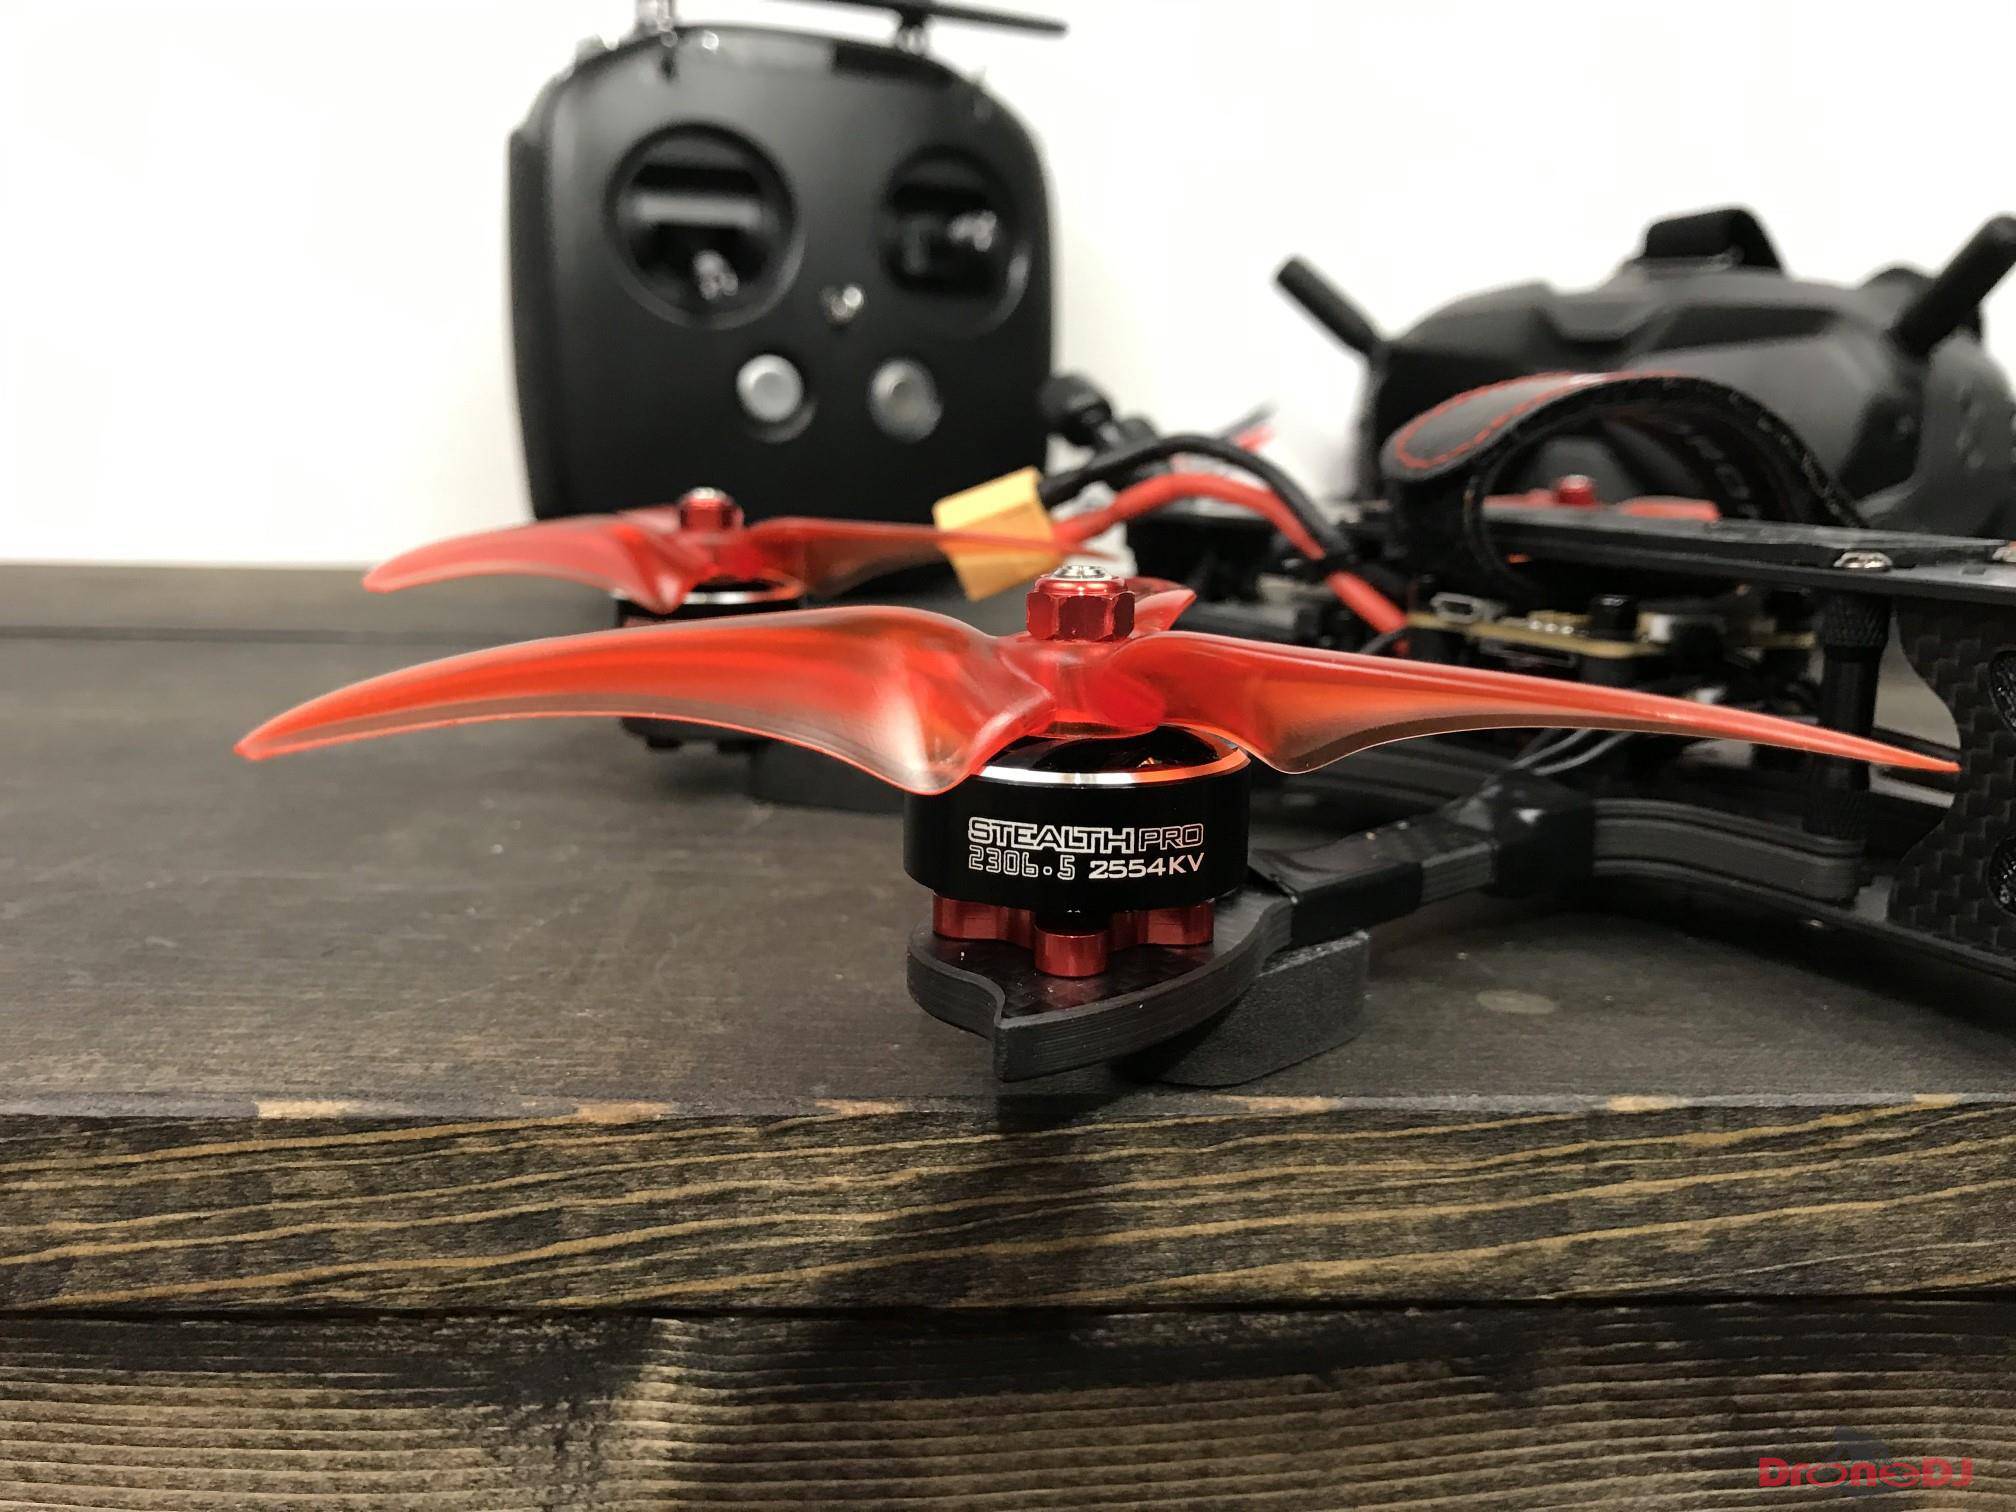 DJI FPV — Is it worth the hype? Is it worth the cost?